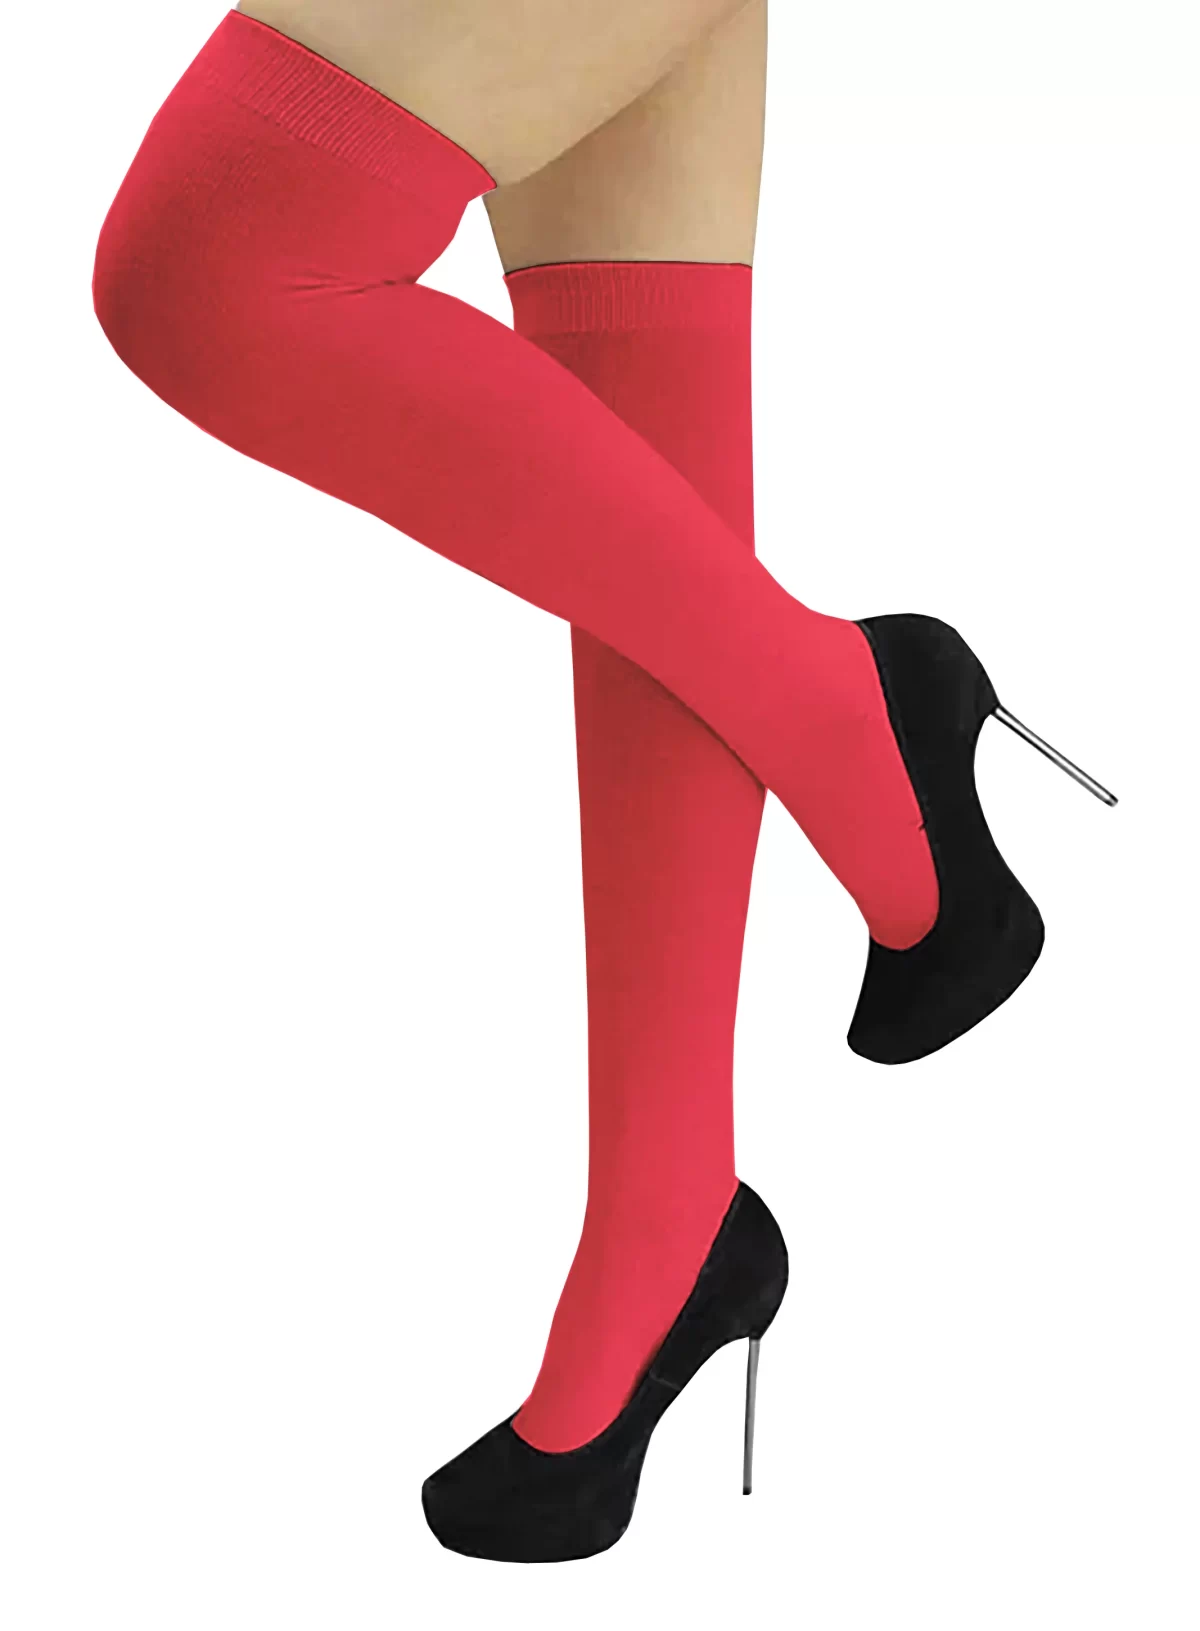 Red Girls and Women's Thigh High Stocking/Socks ( Free Size )3